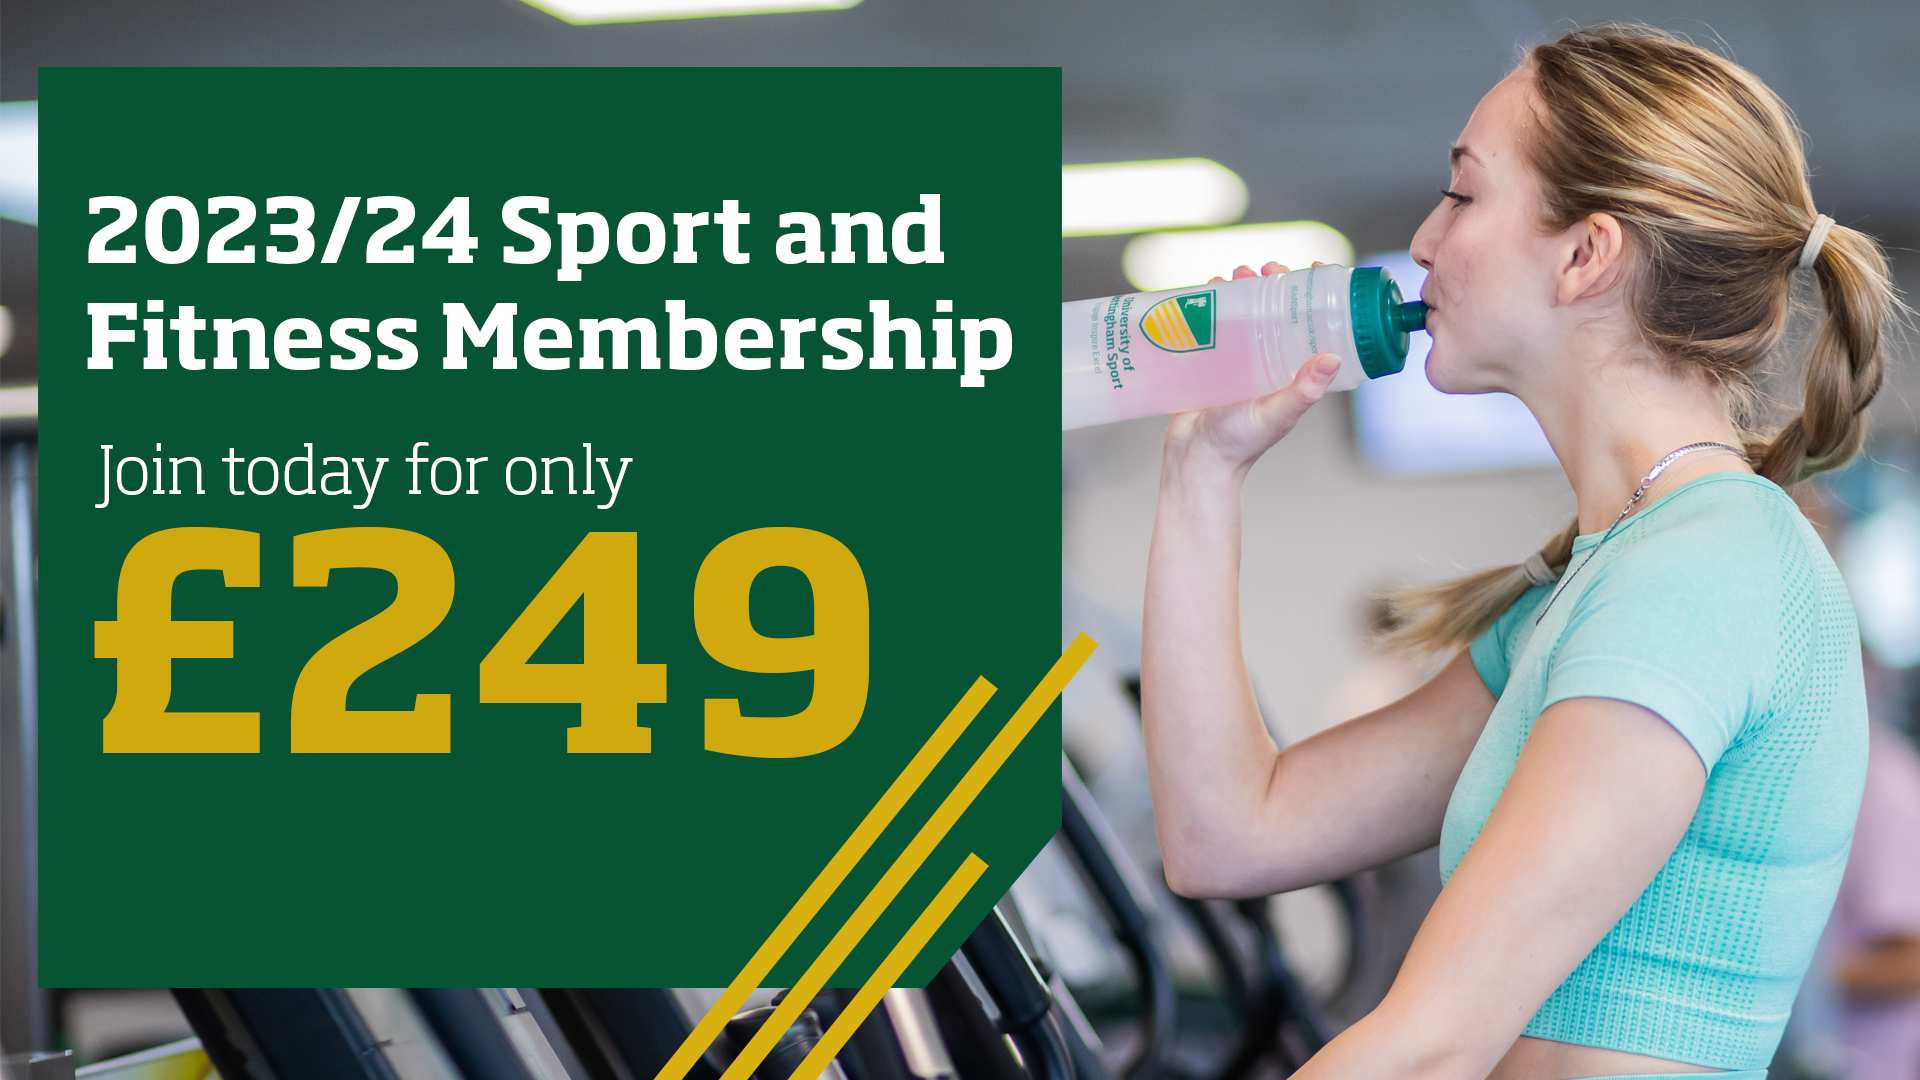 2023/24 Sport and Fitness Membership